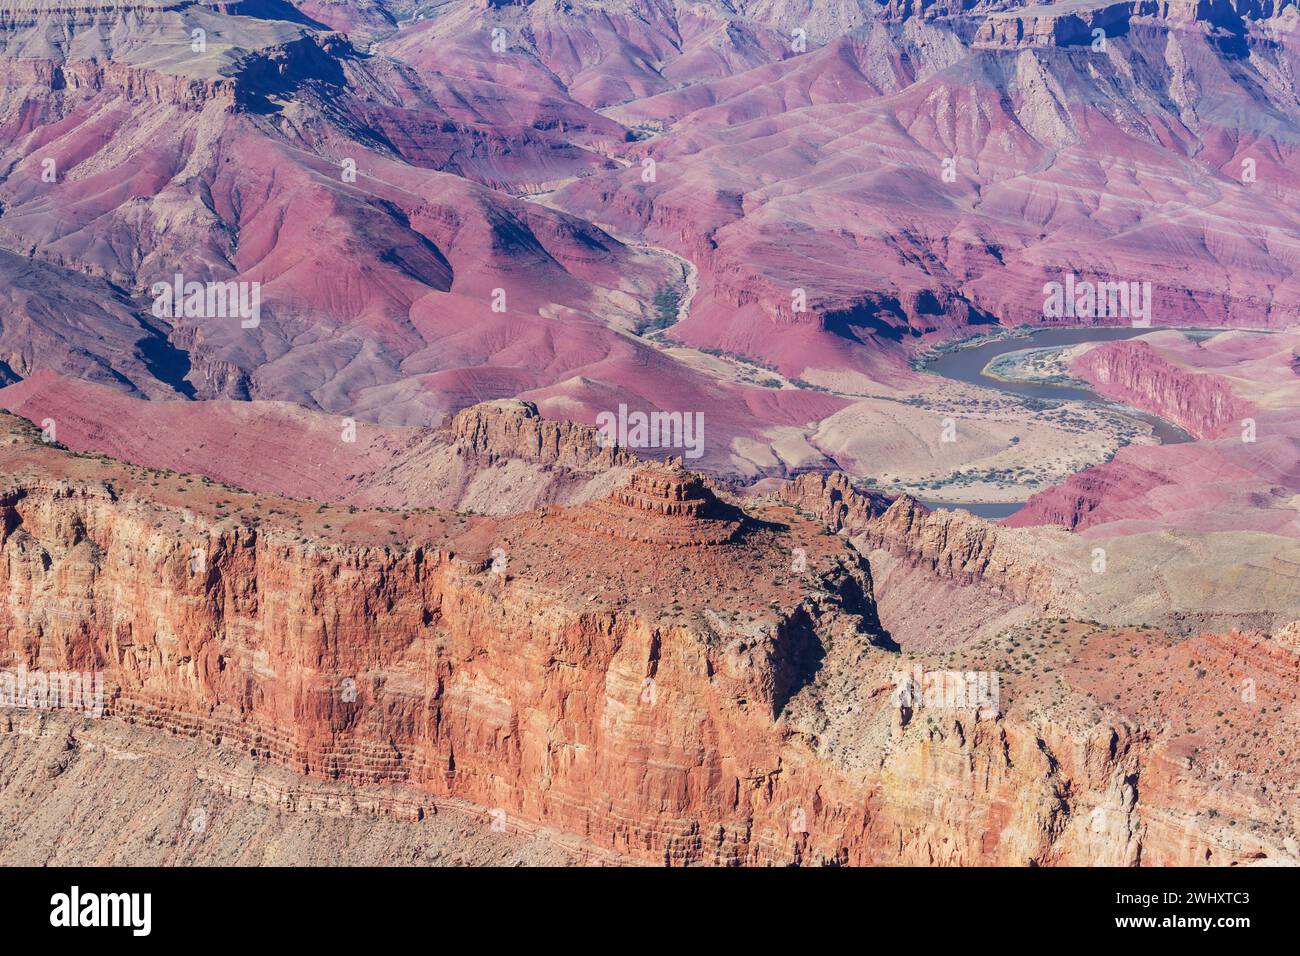 The Grand Canyon [grÃ¦nd ËˆkÃ¦njÉ™n] is a steep, approximately 450-kilometer-long gorge in the north of the US state of Arizona, Stock Photo